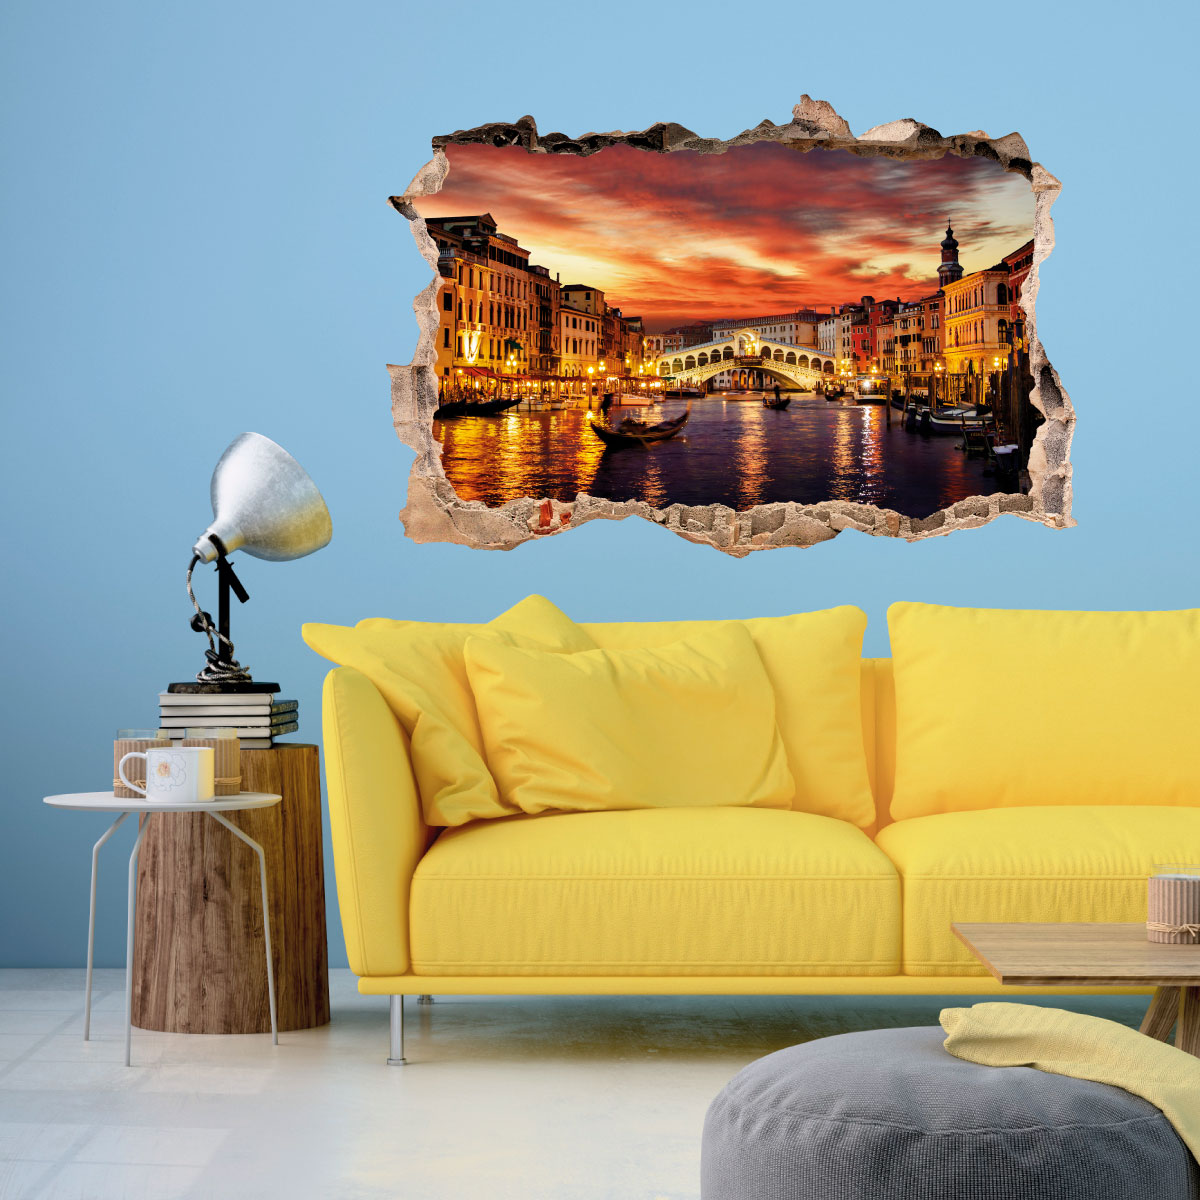 Wall decal Landscape Venice at dusk